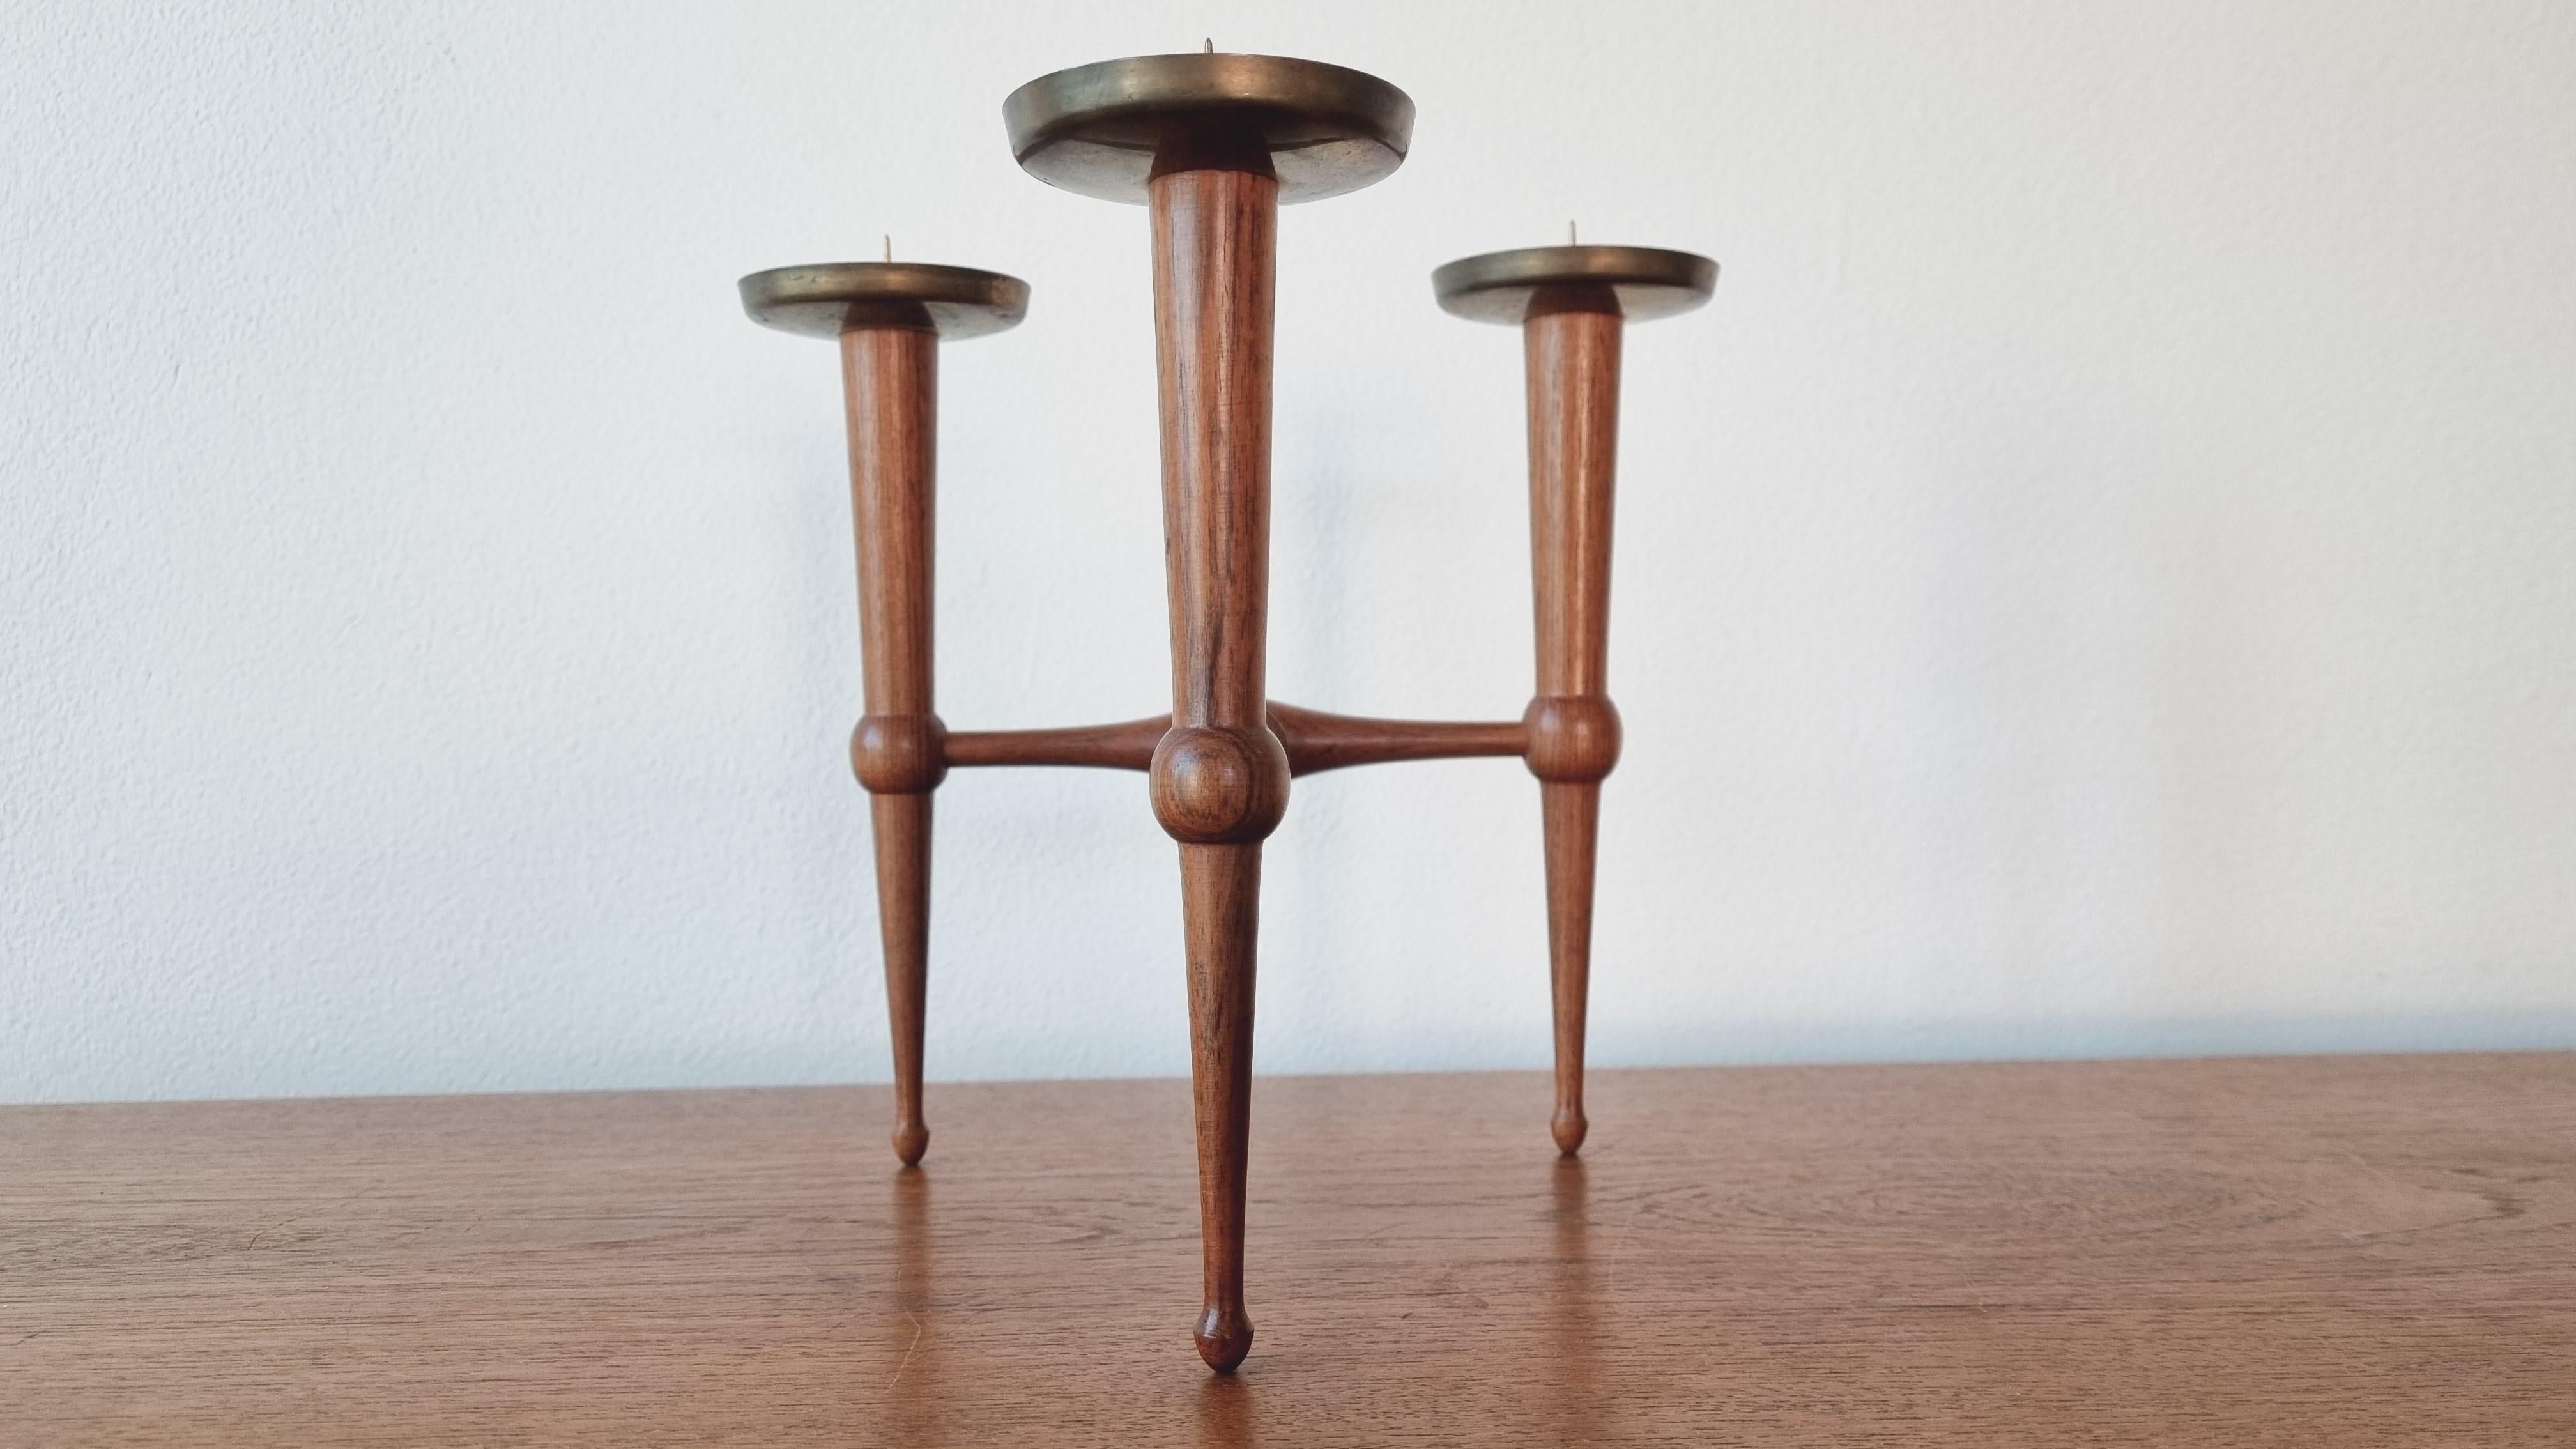 Midcentury Teak and Brass Rare Table Candle Holder / Stick, Denmark, 1960s For Sale 4